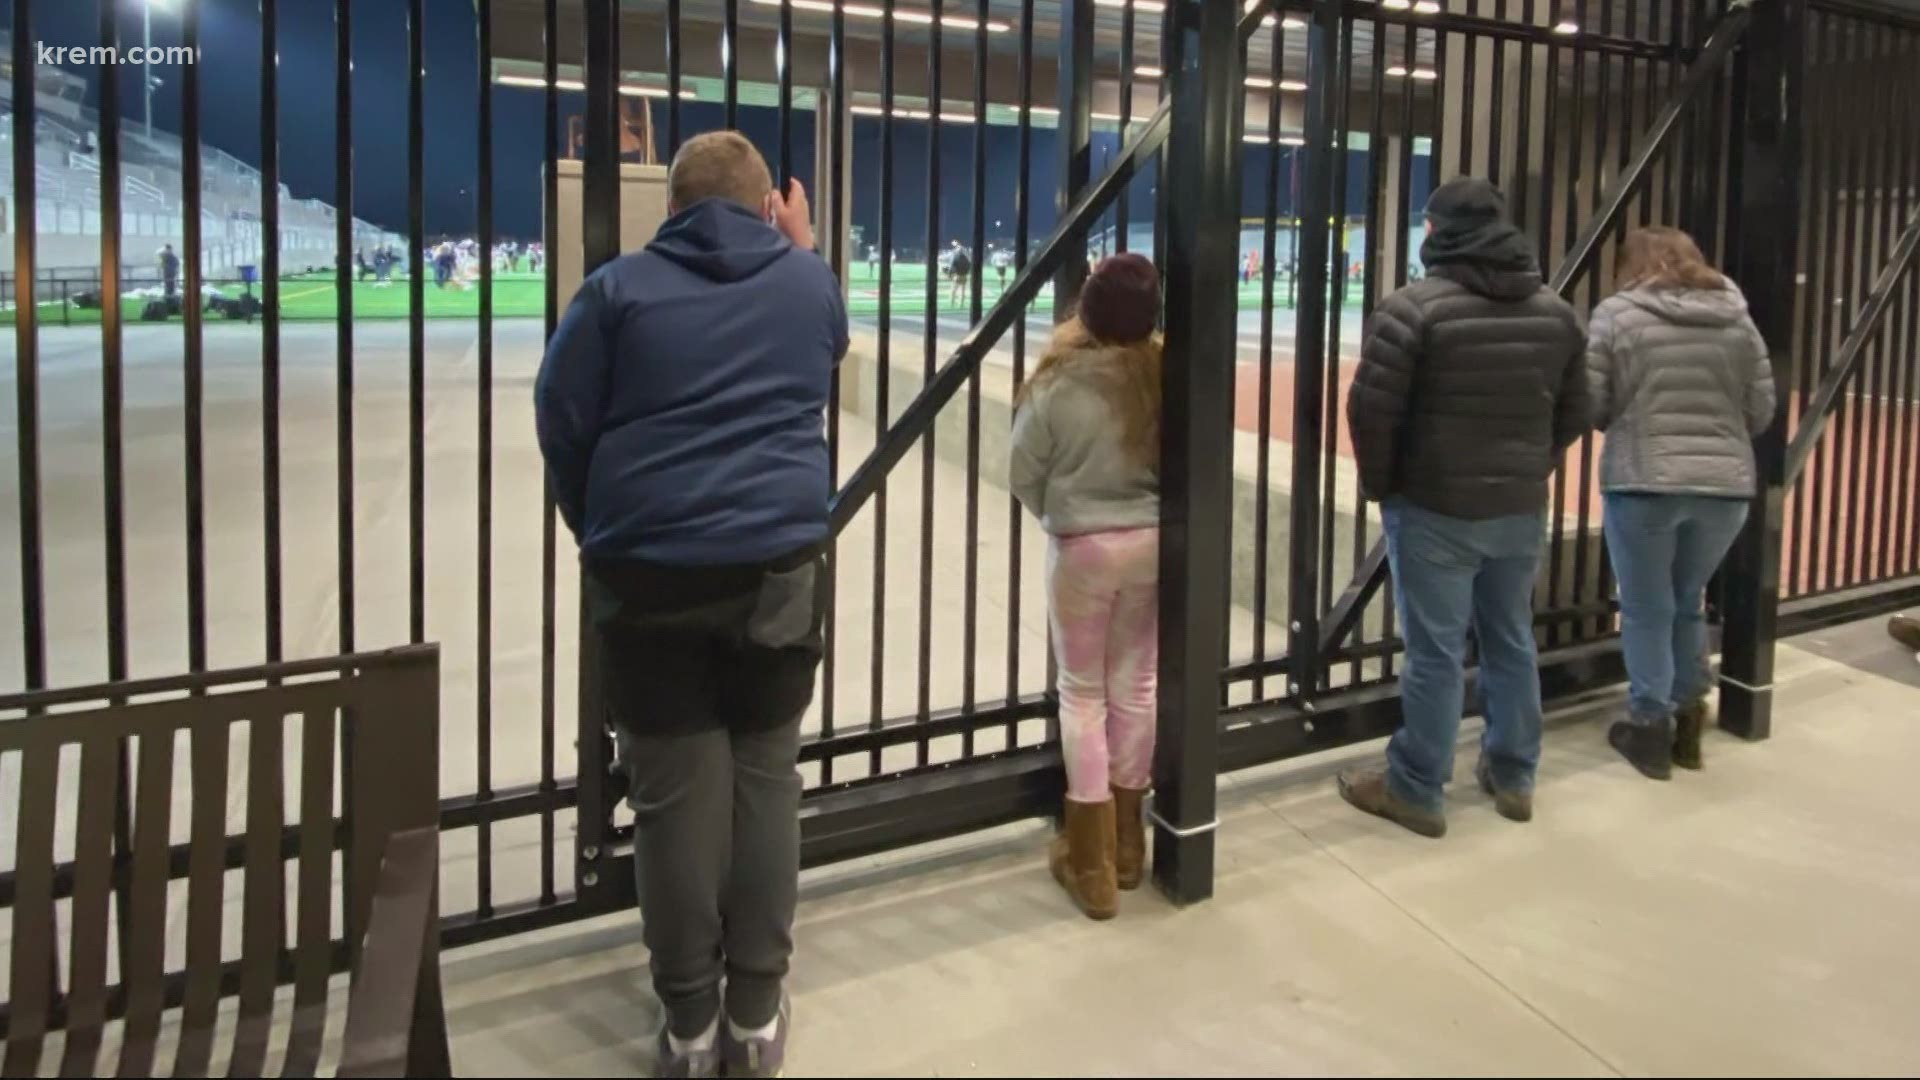 GSL football fans watch games from fence due to COVID restrictions krem